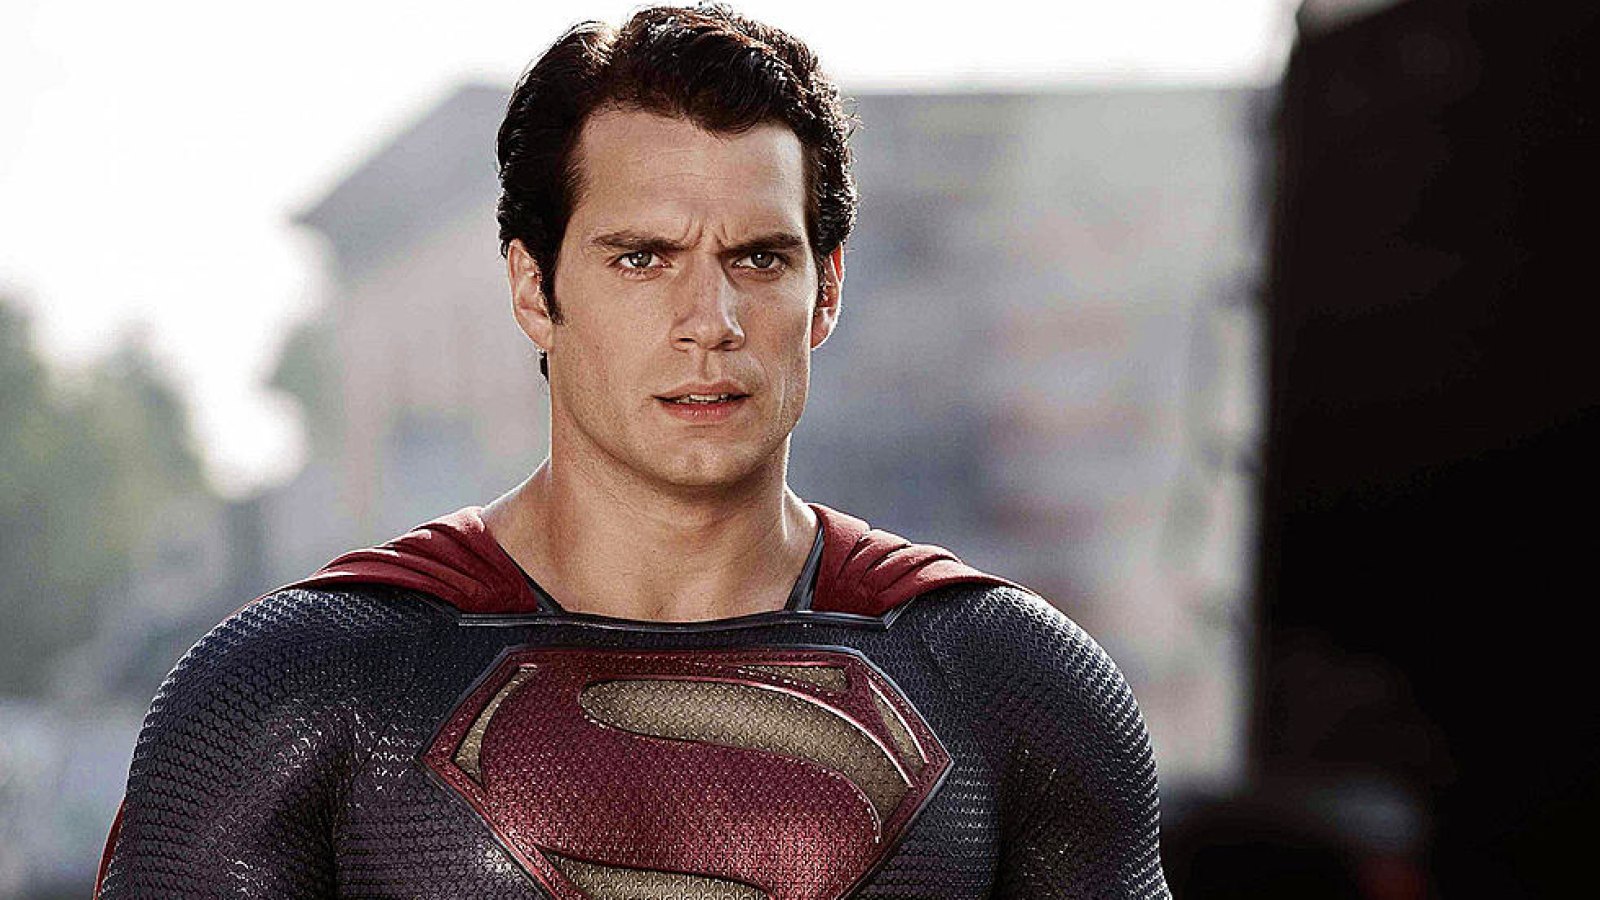 Nine years ago today, Man of Steel was released what are the current  thoughts of this community regarding Henry Cavill's portrayal as Superman  and the movie itself individually? : r/DCFilm